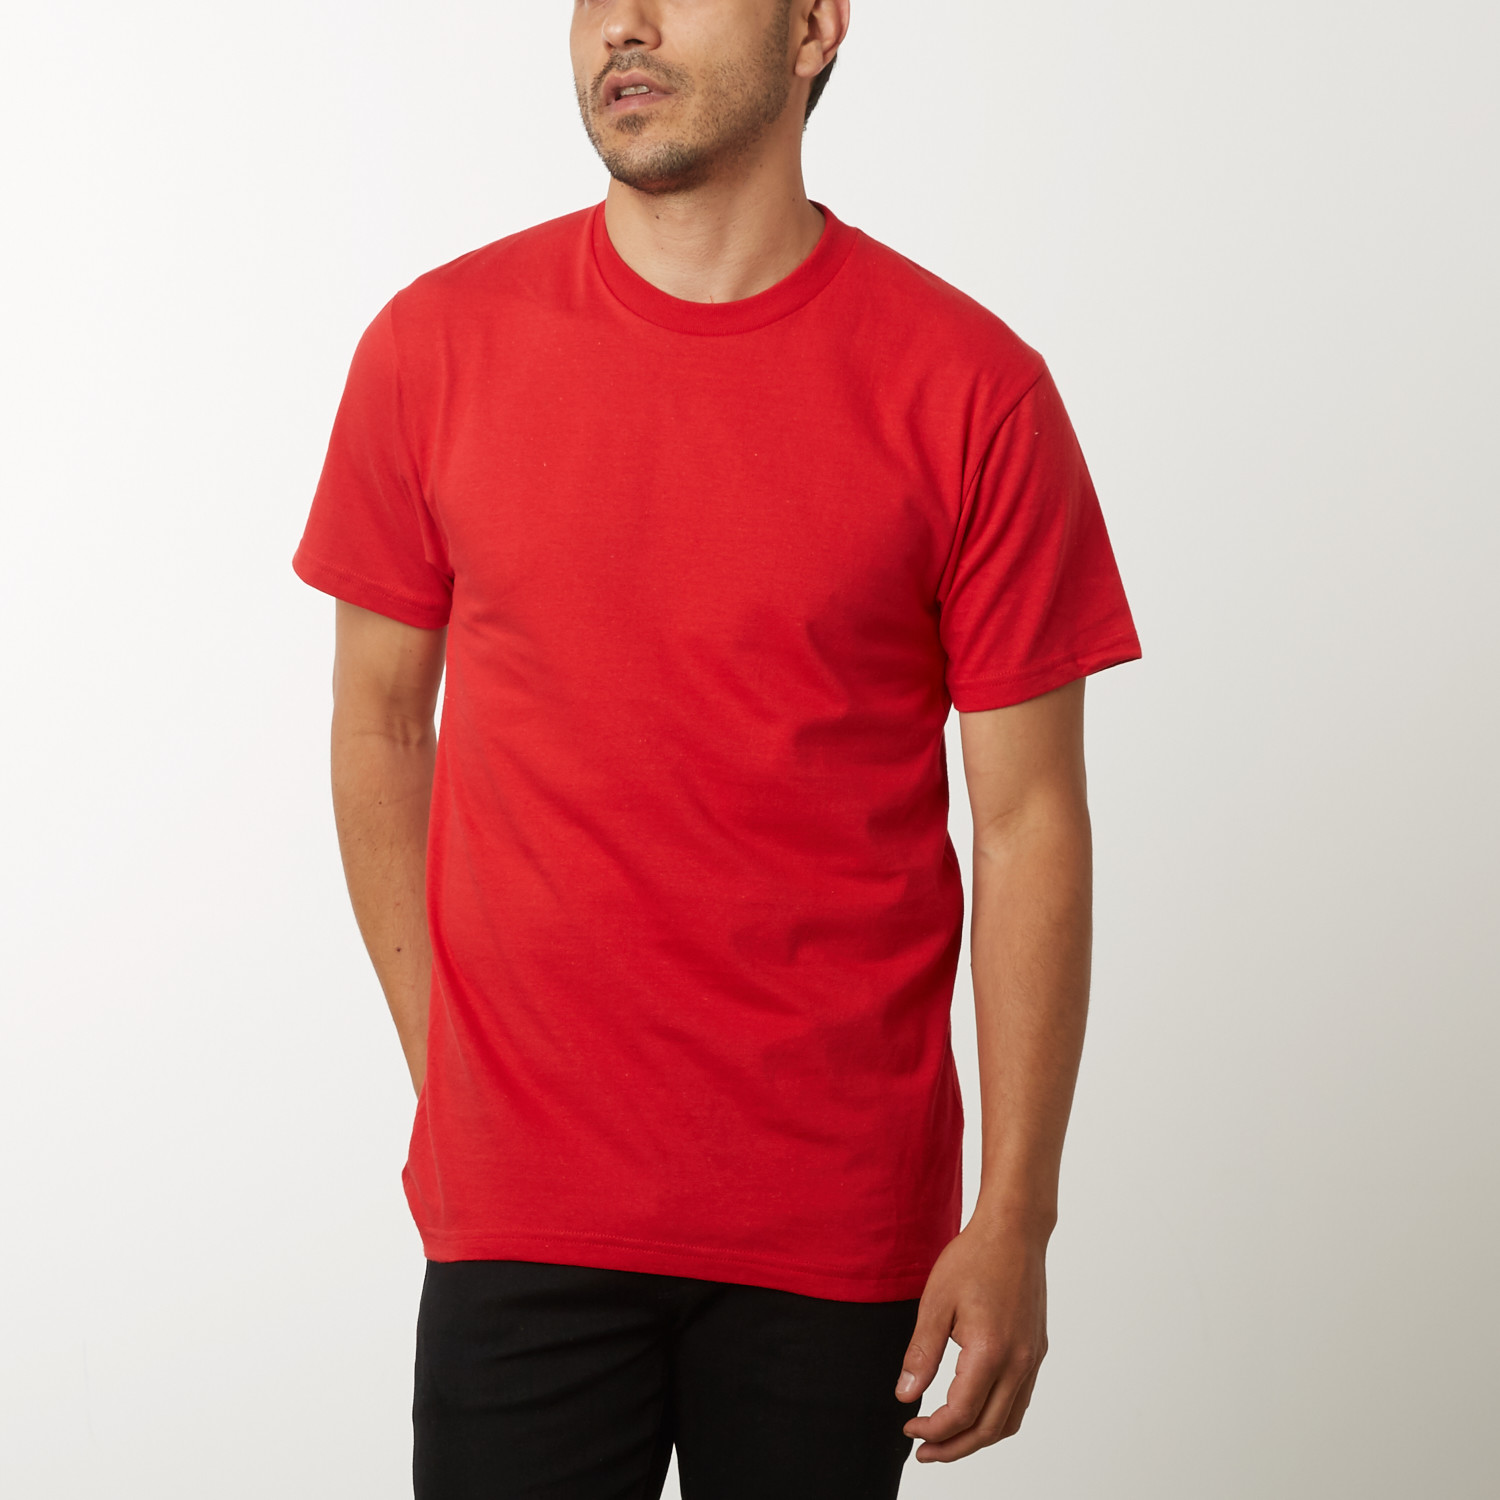 red t shirt blank